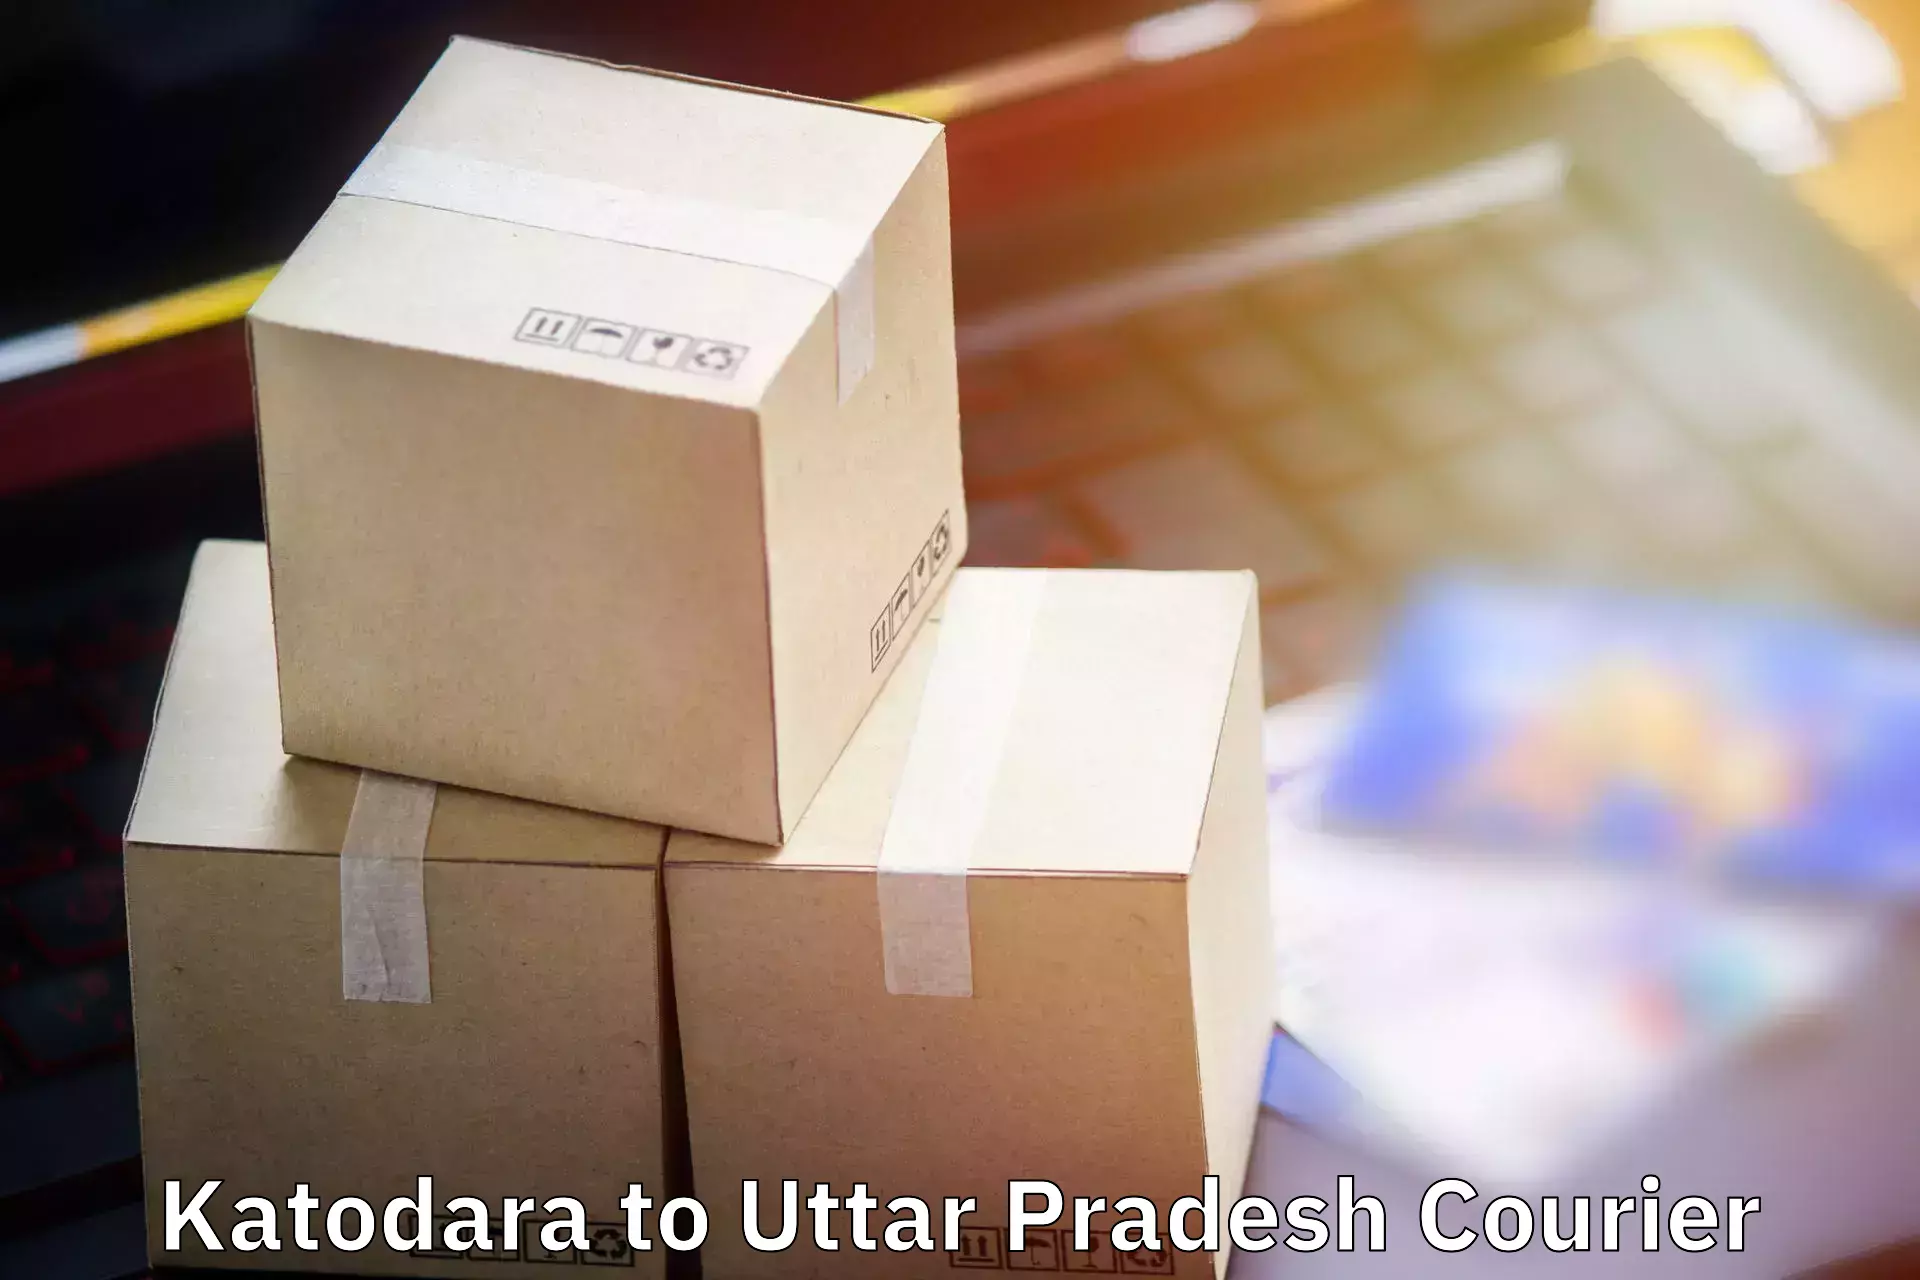 Personal effects shipping in Katodara to Bareilly